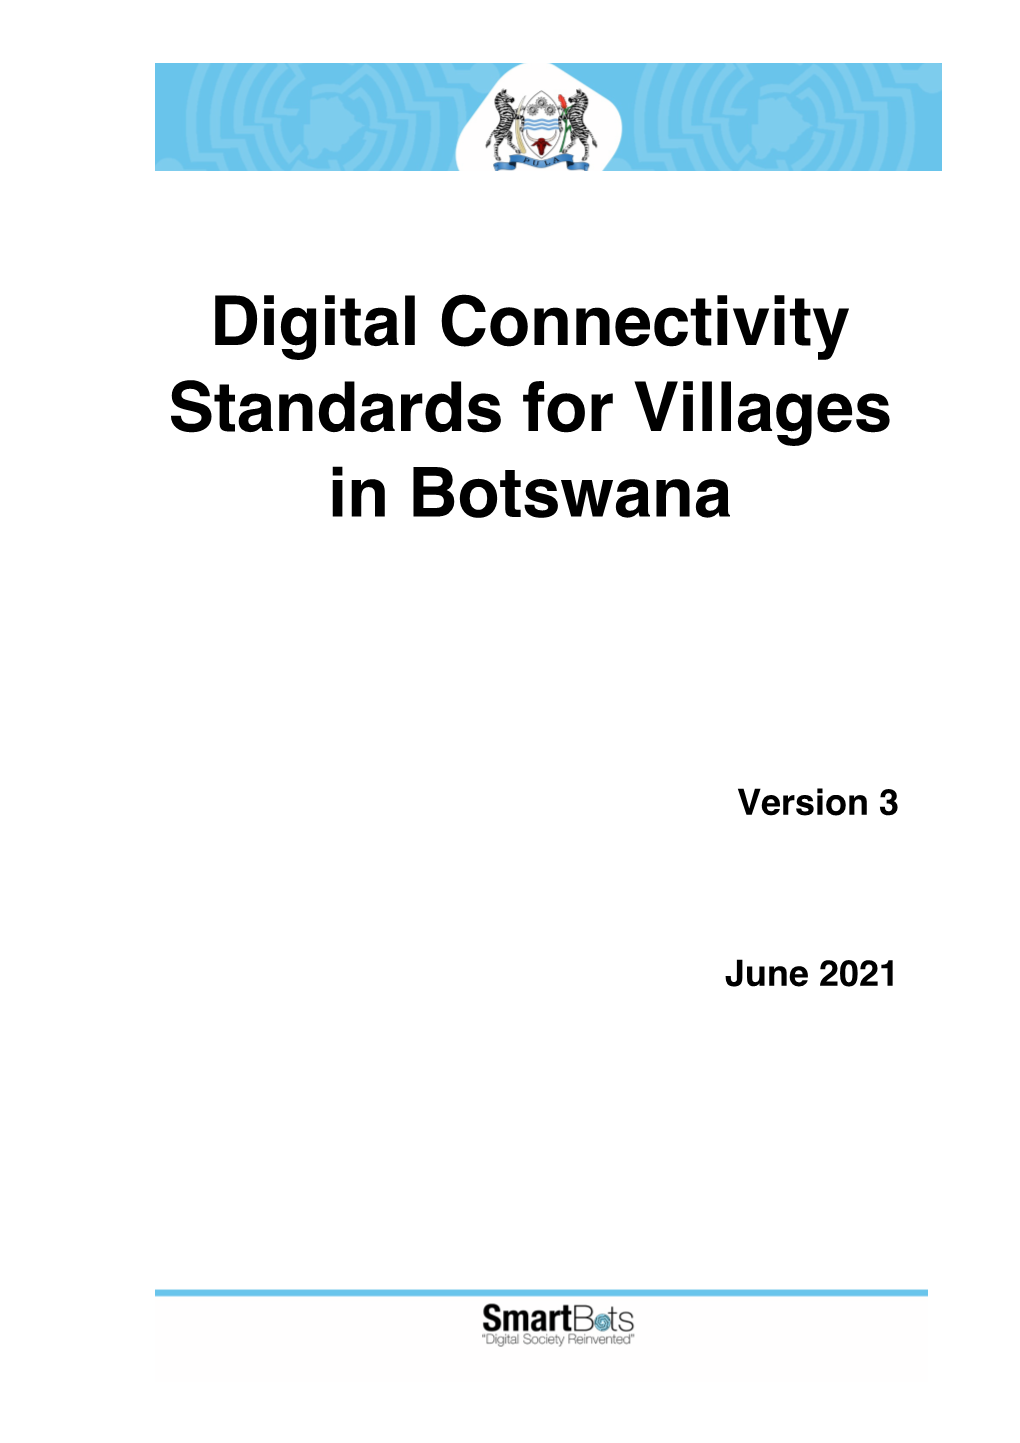 Digital Connectivity Standards for Villages in Botswana